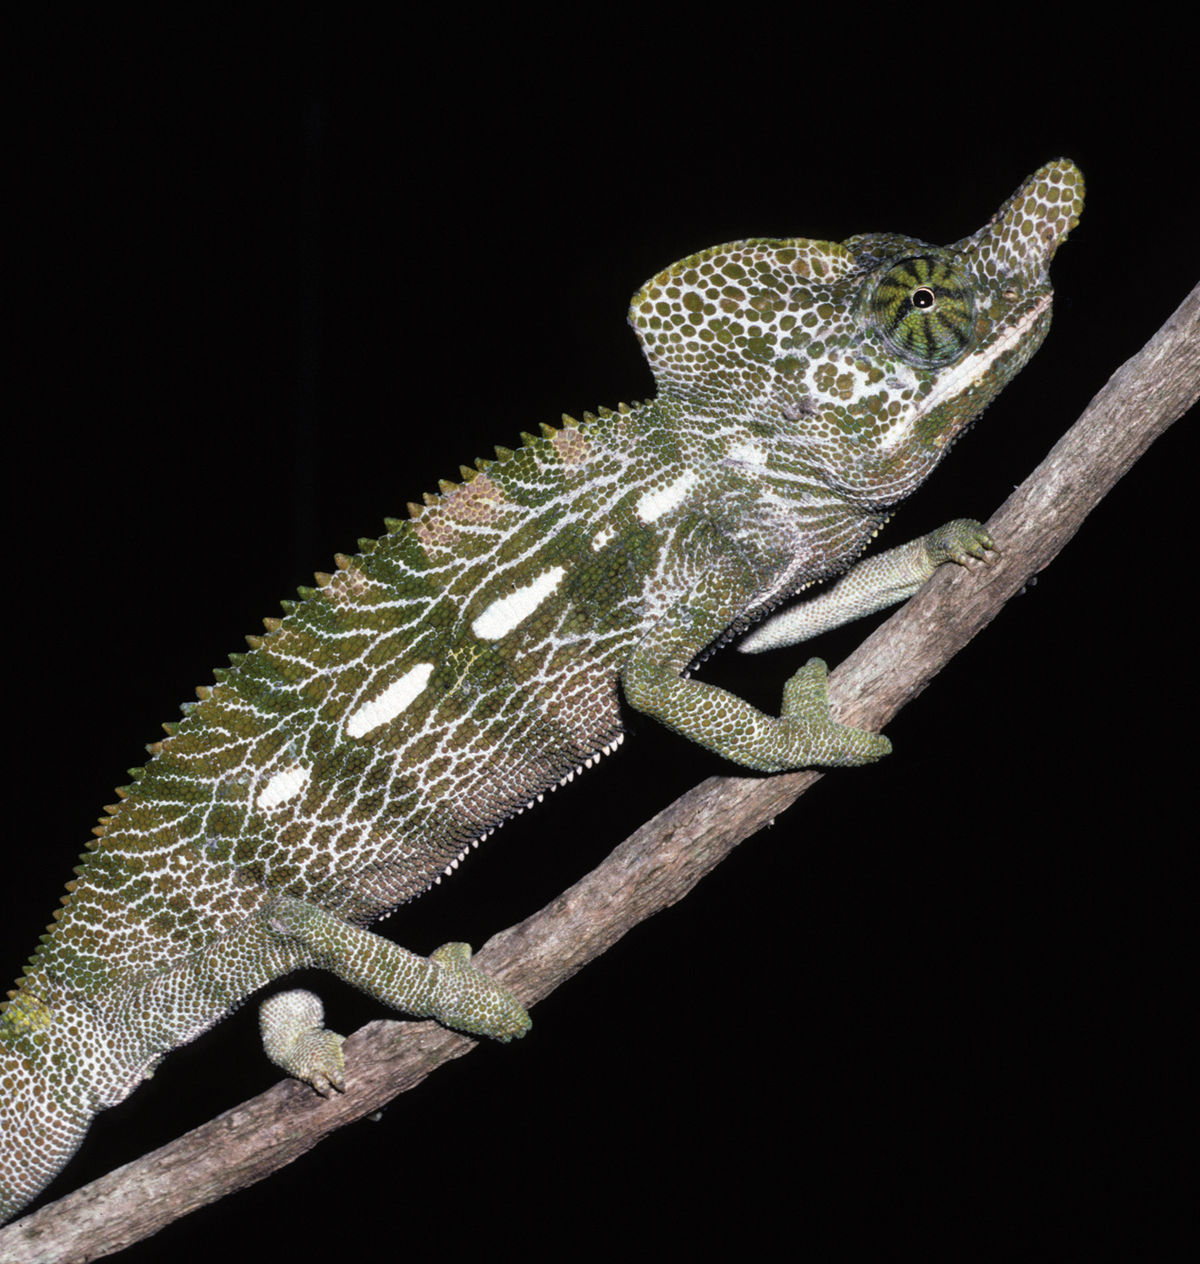 Which chameleon has the shortest lifespan?